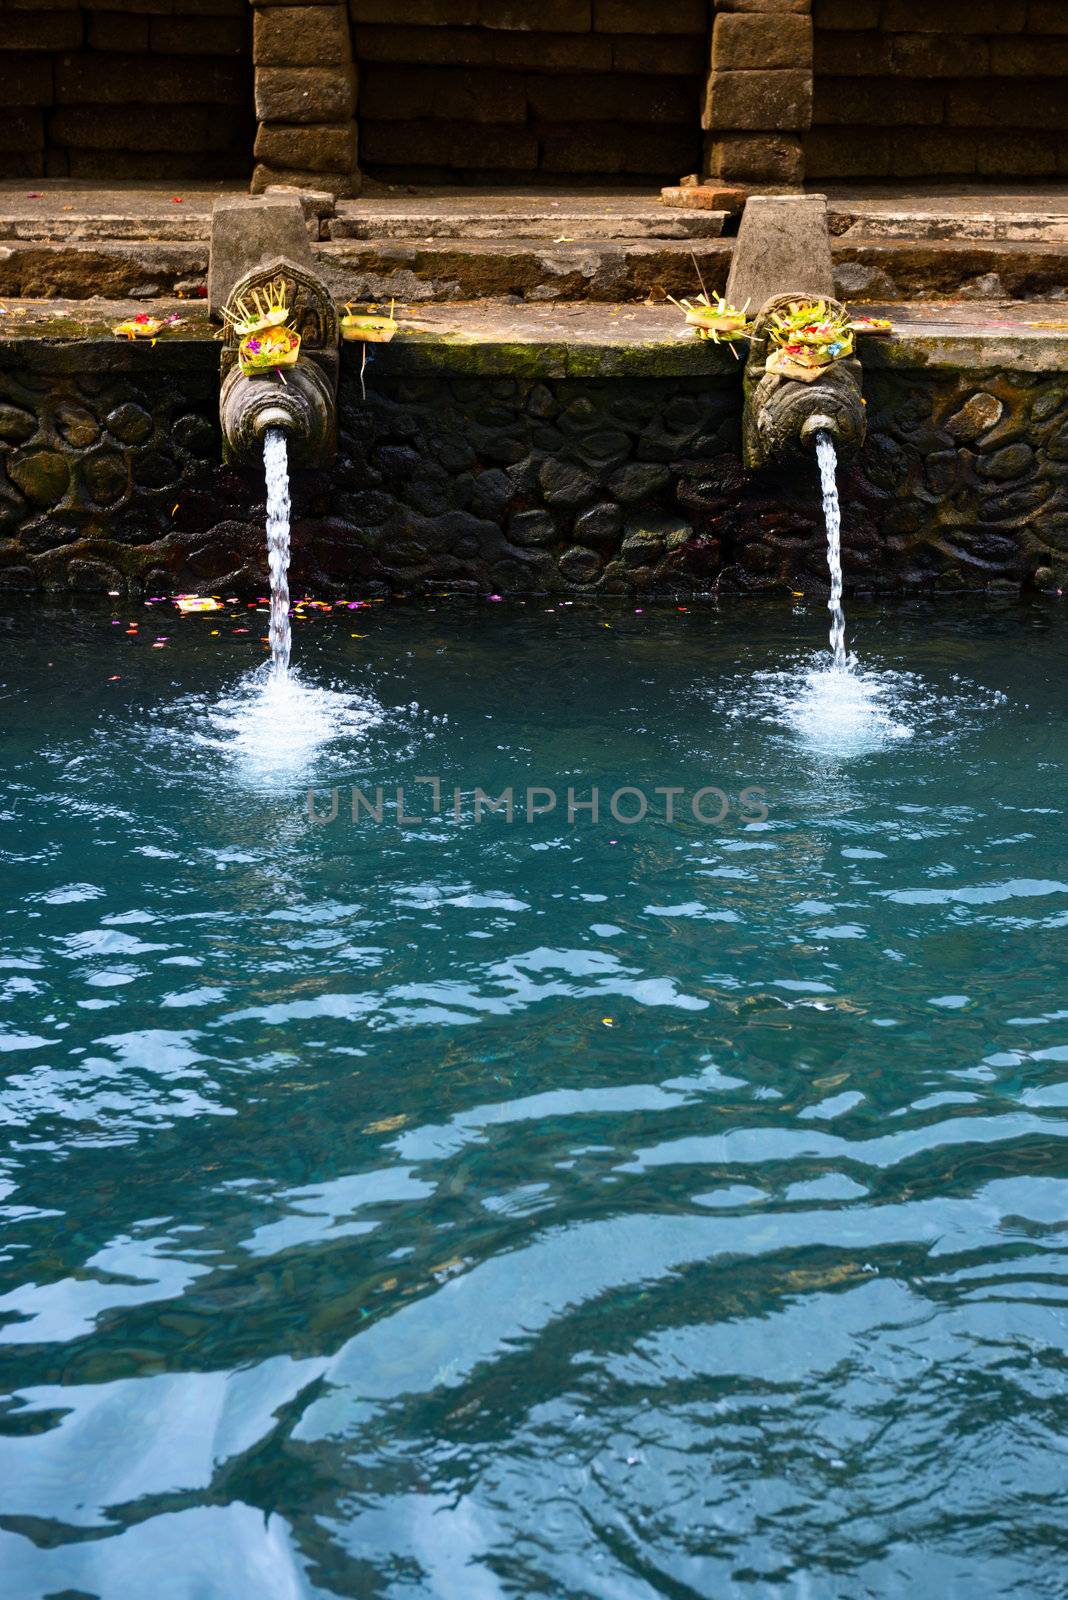 Fountains and pool with holy spring water in Tirta Empul temple, Bali, Indonesia 